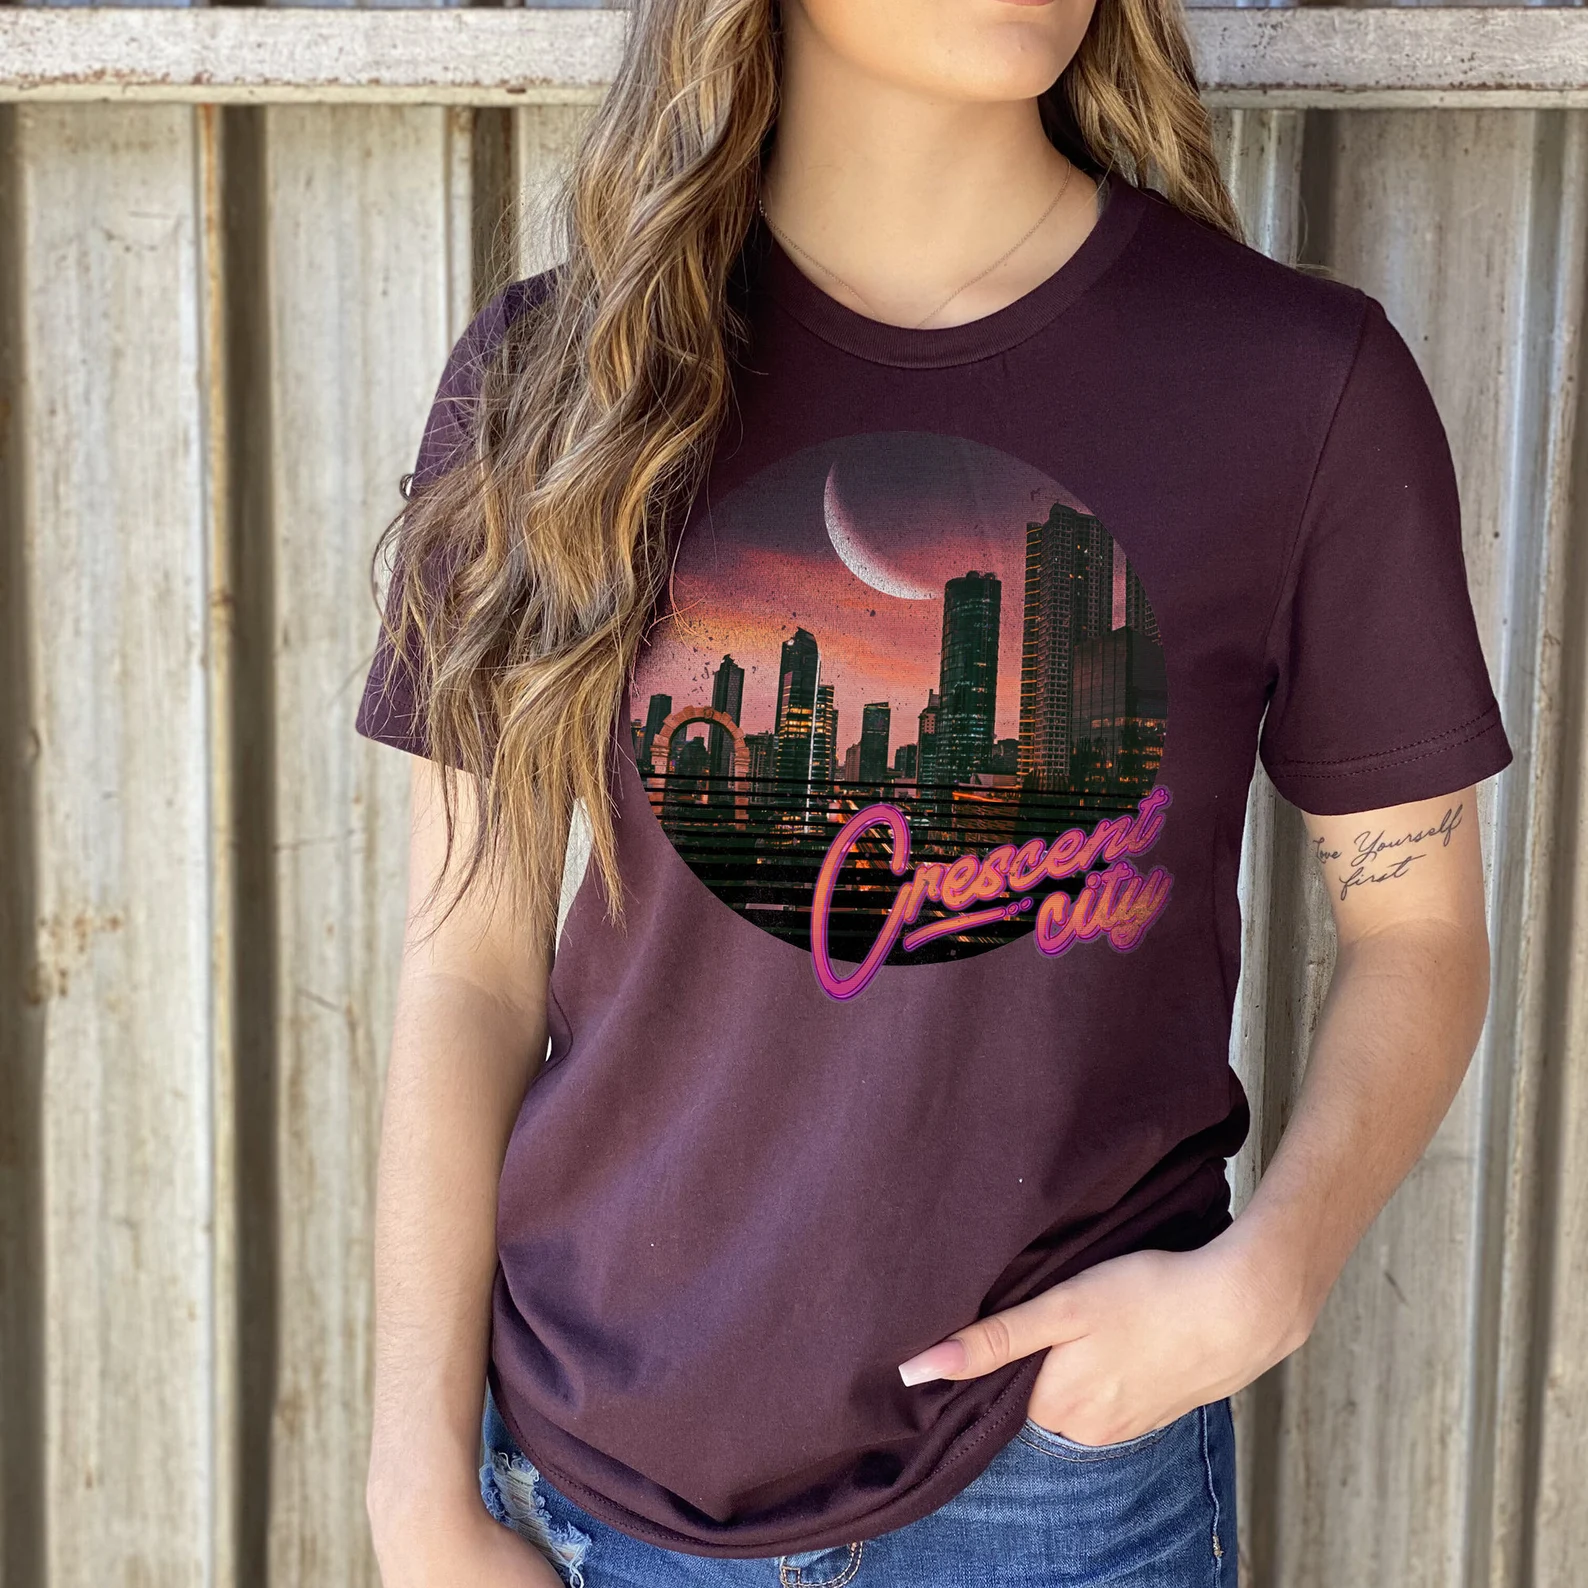 A photo of a person with long brown hair wearing a purple shirt with a night skyline of a city and crescent city written on the front. 